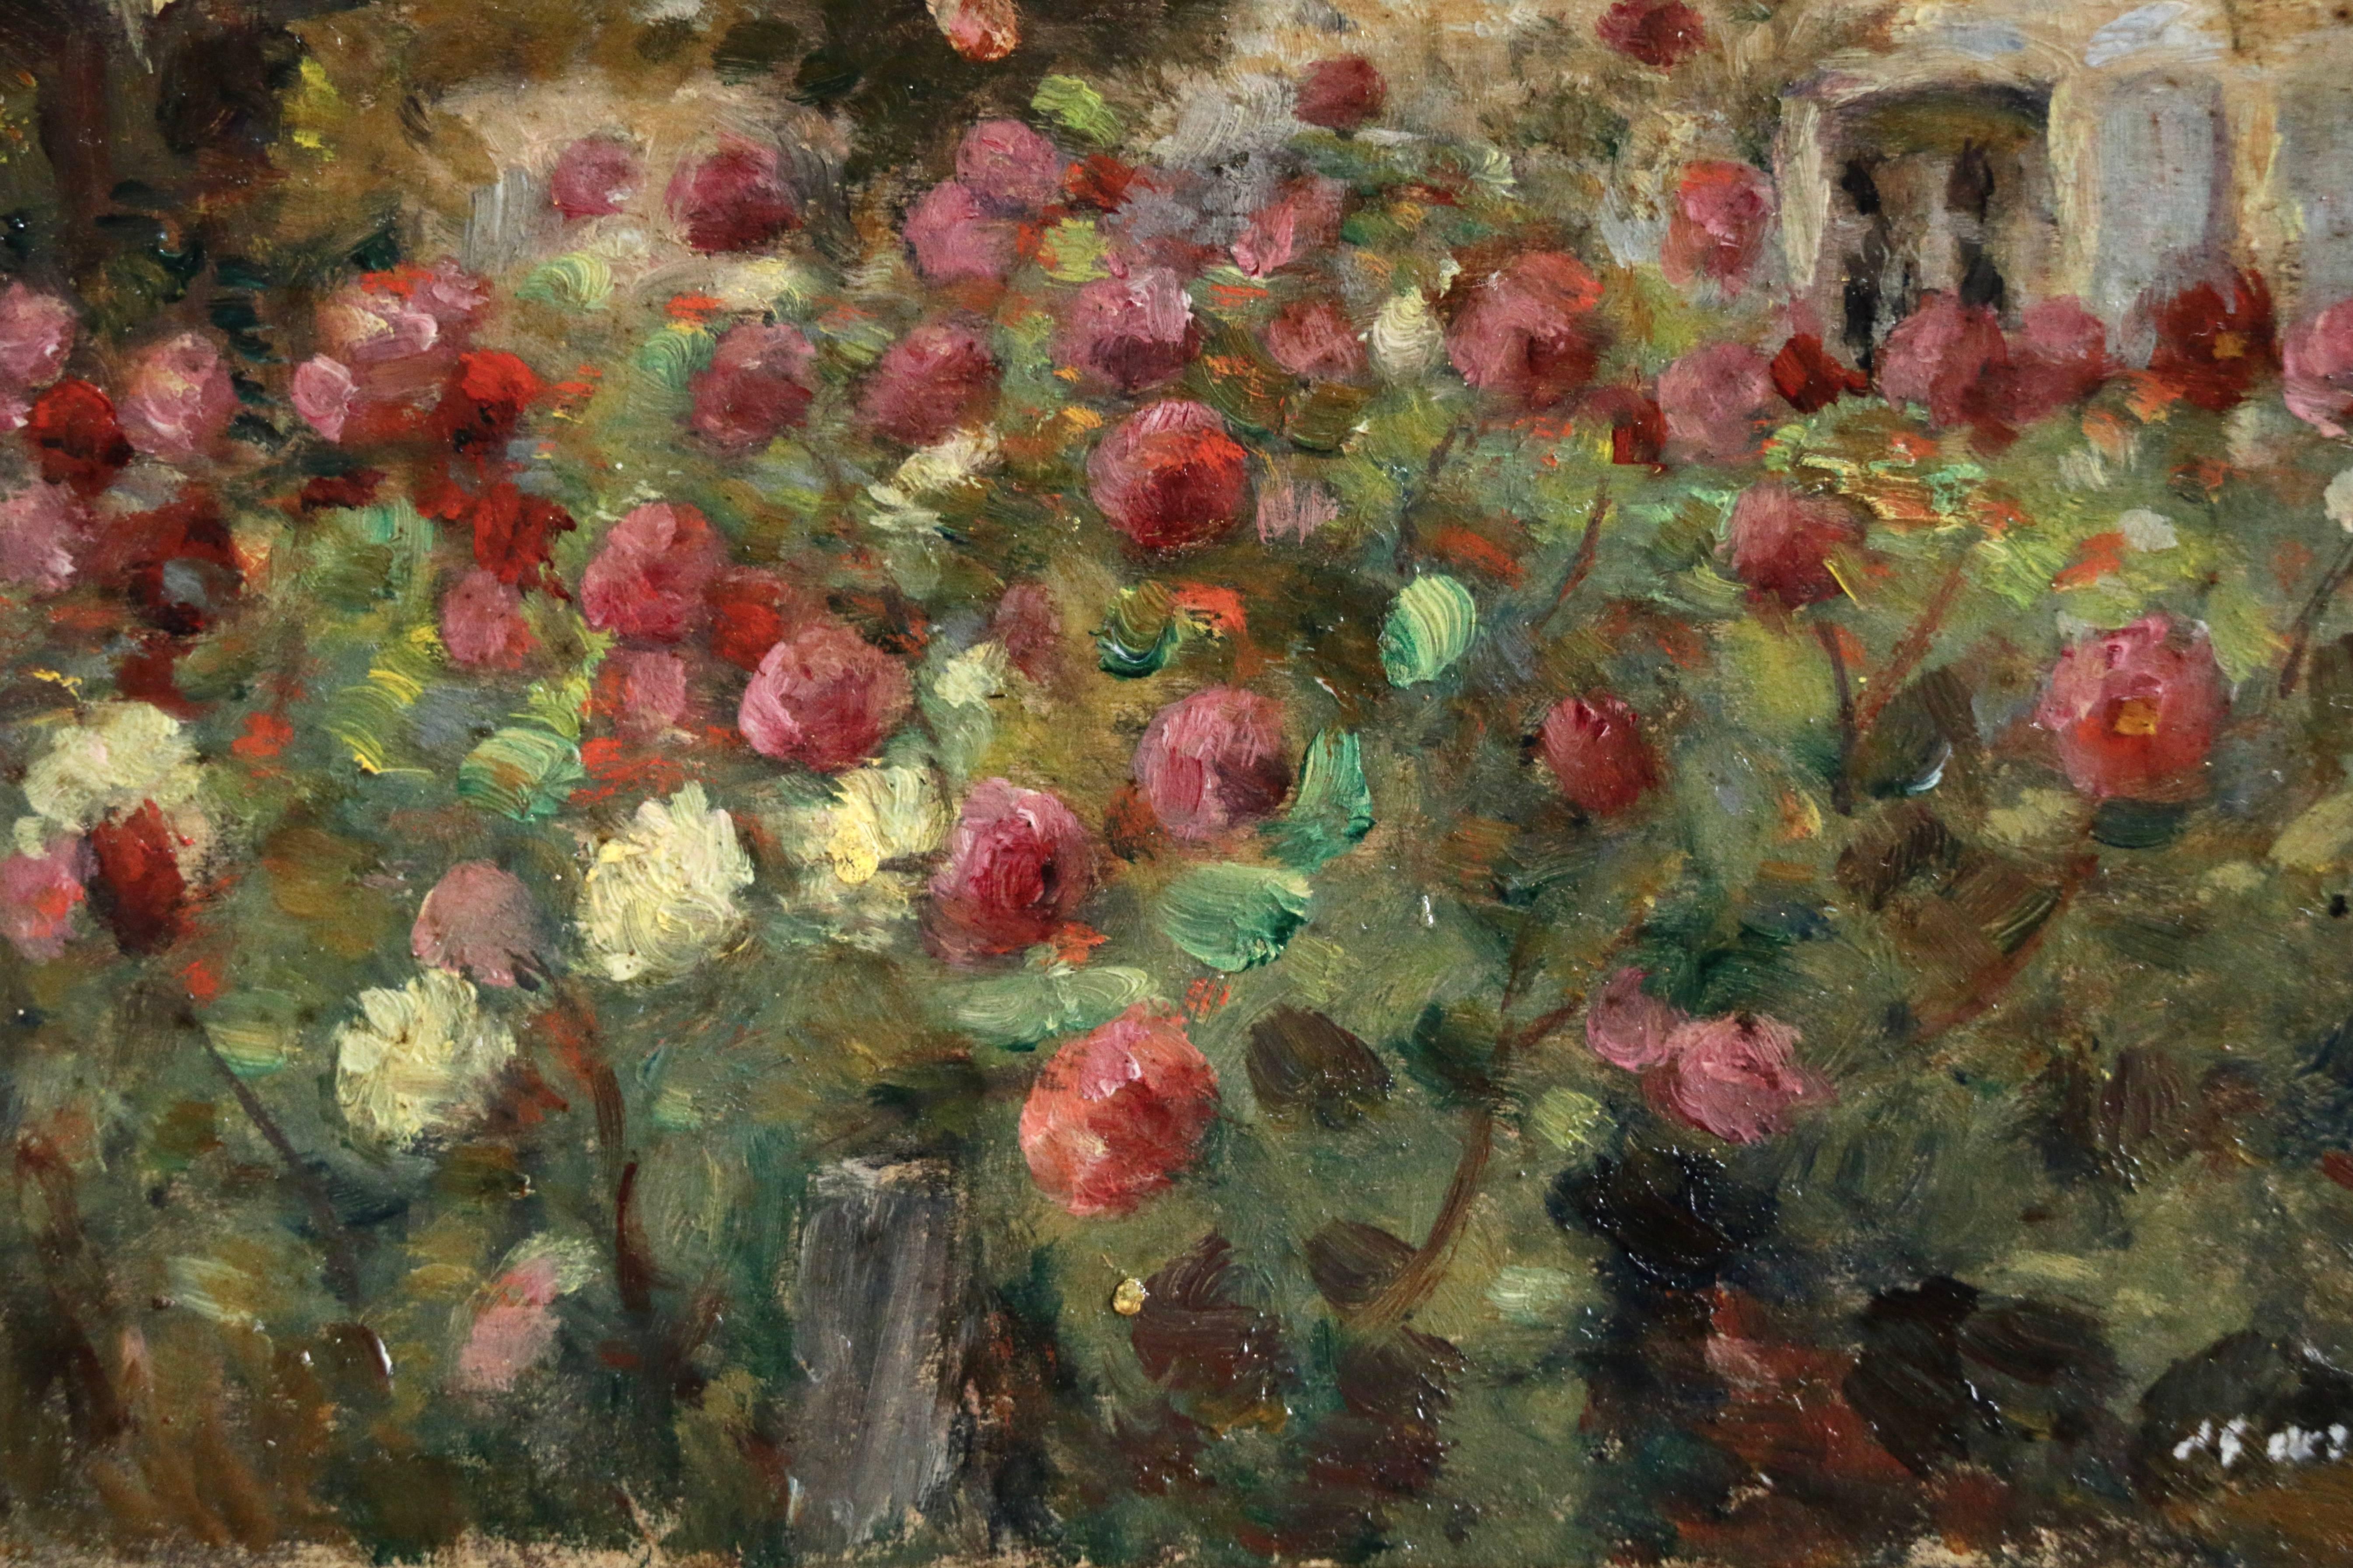 Flowers in the Artists Garden - Impressionist Painting by Marie Duhem